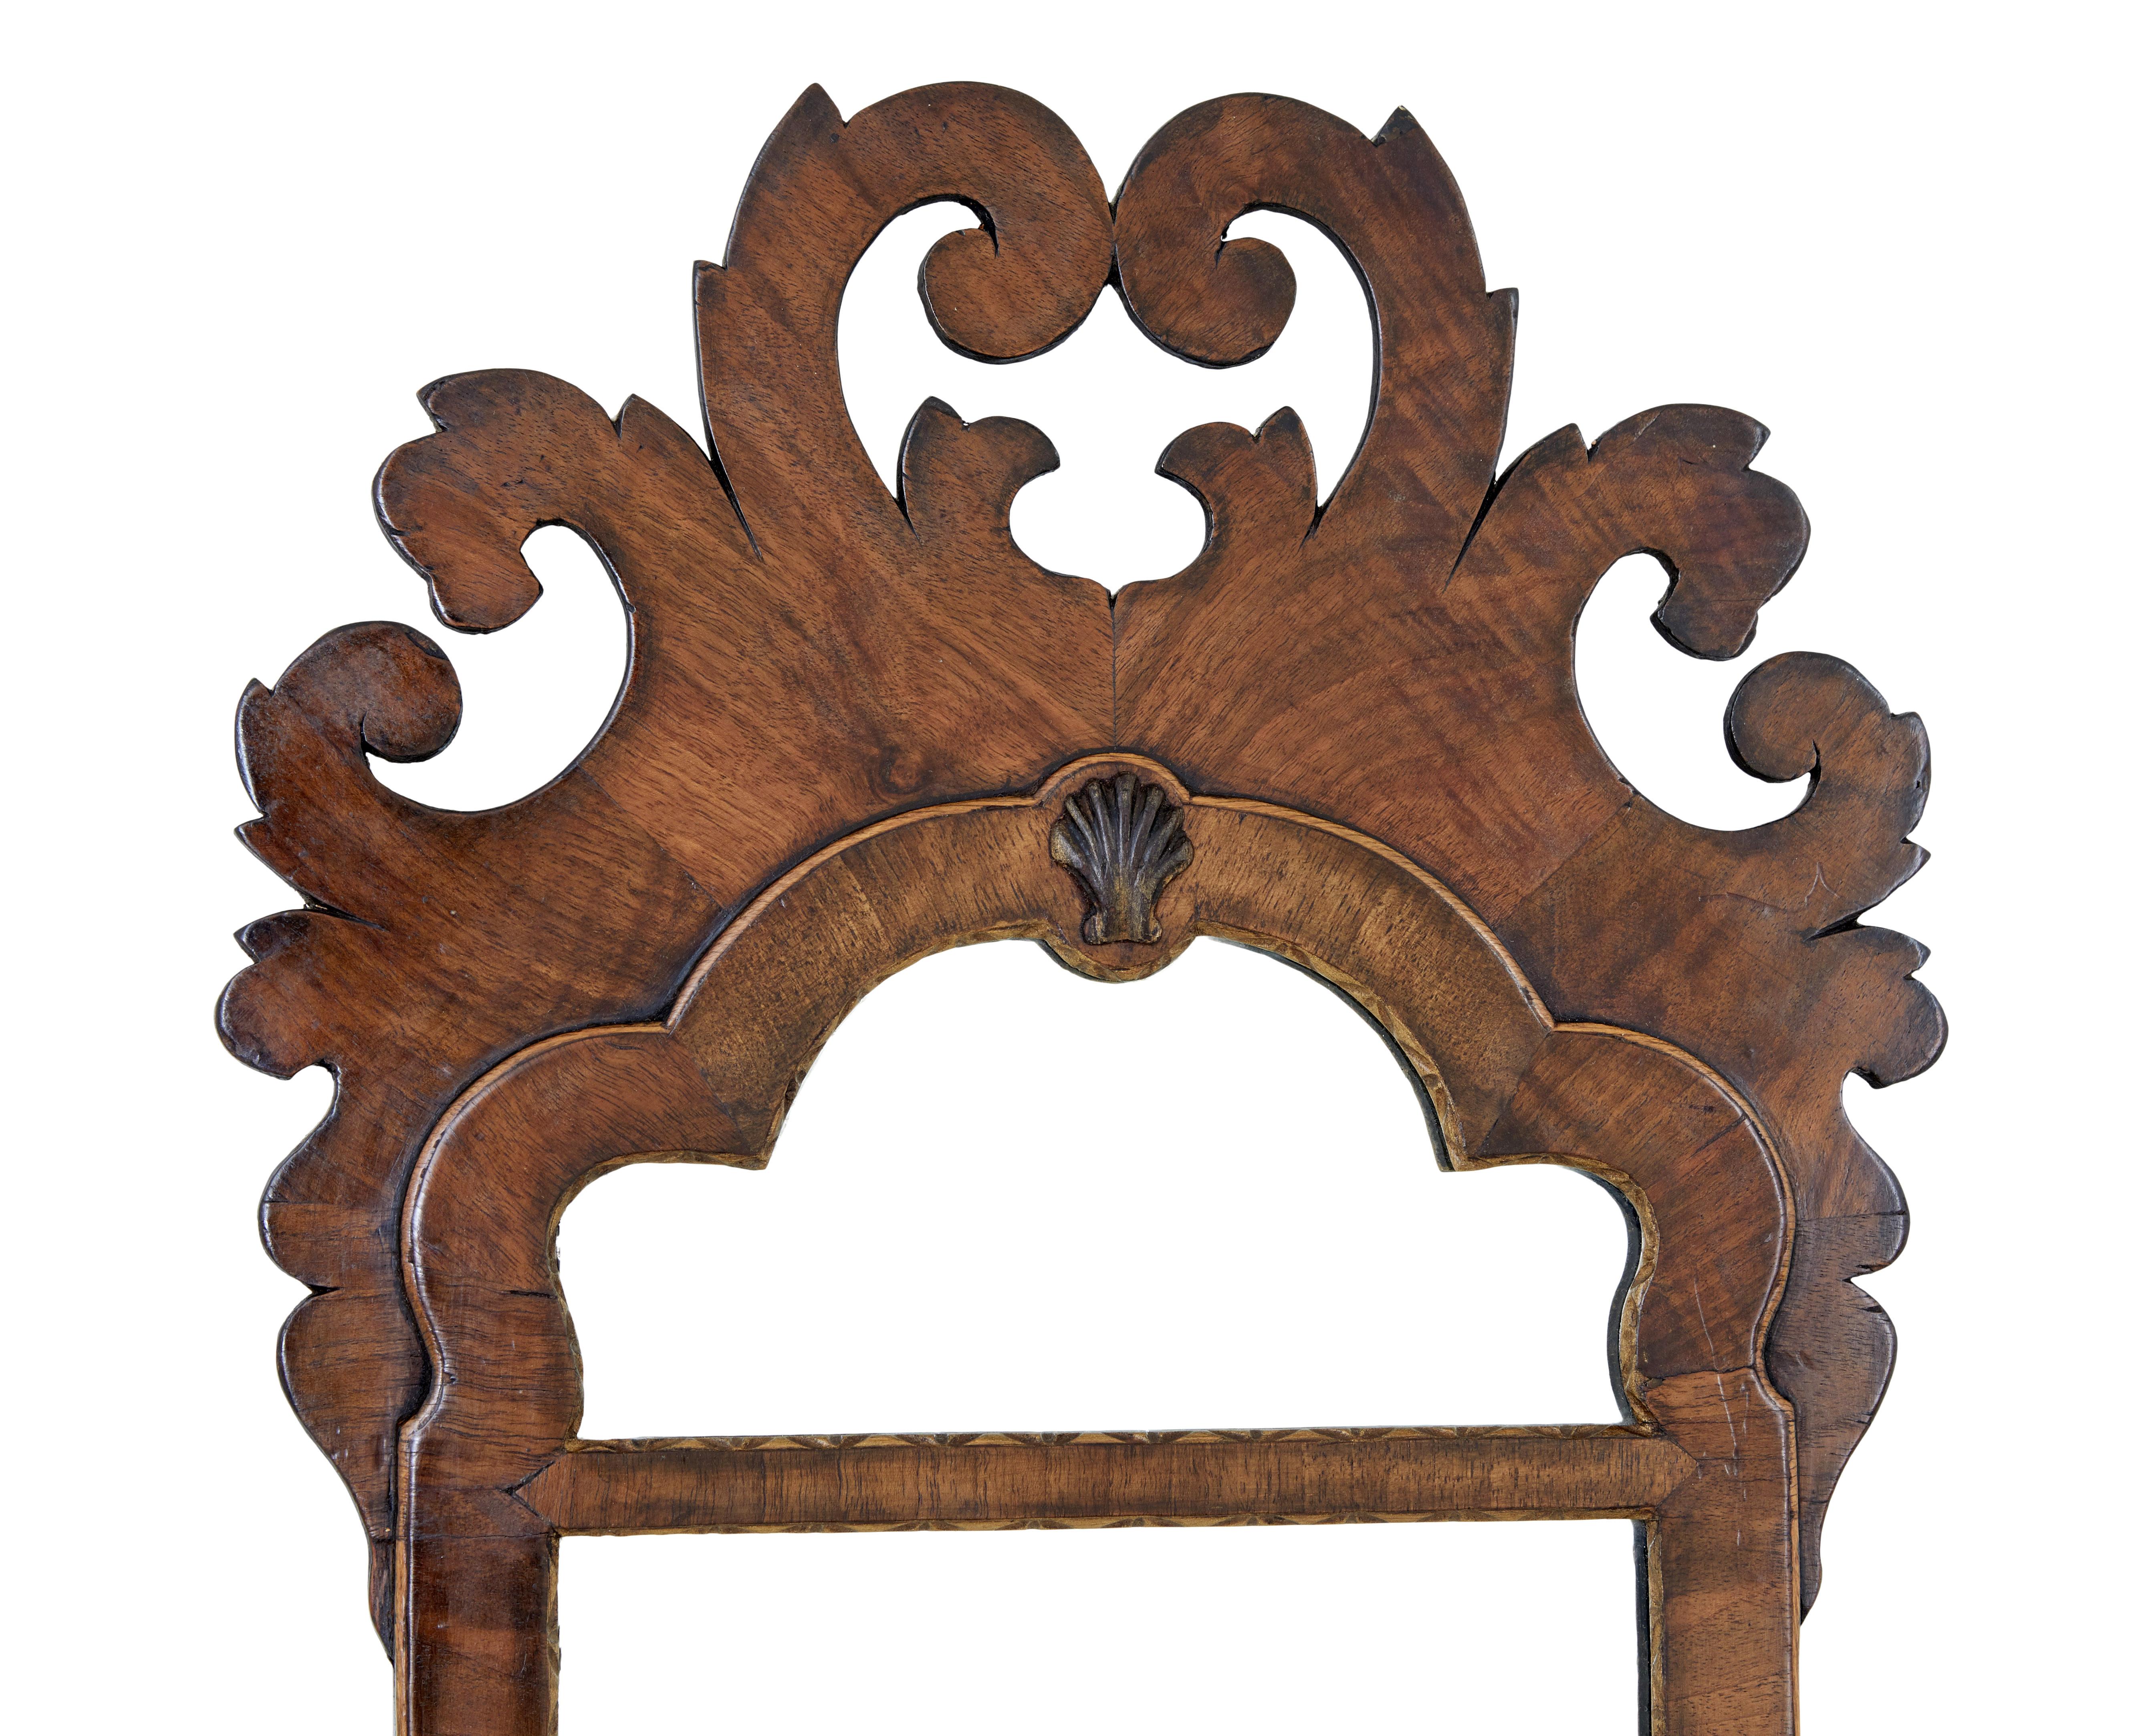 Early 20th century walnut rococo revival mirror circa 1910.

Good quality rococo revival mirror, which takes it's inspiration from the George II period.

Fret cut mirror with swags, cross banding and a central shell.  2 part mirror with further